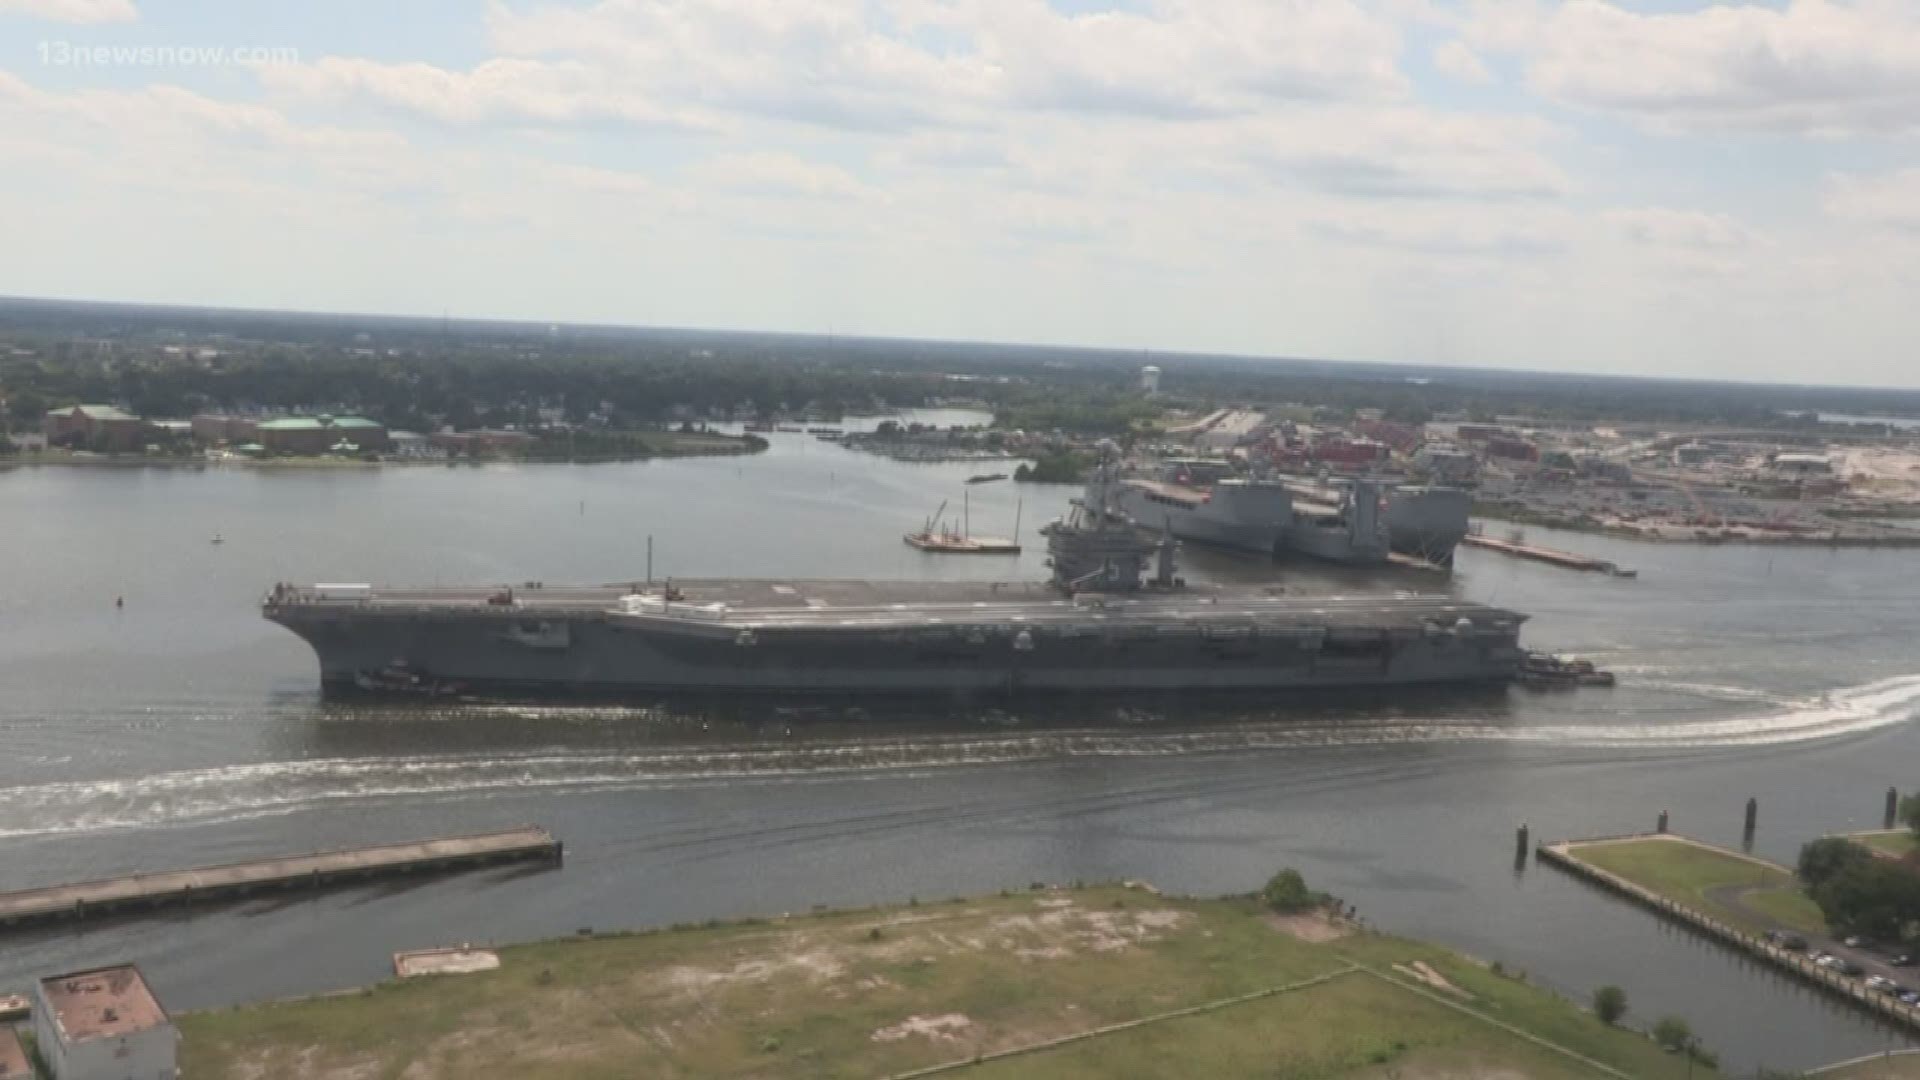 A new report released by the Navy claims Hampton Roads saw an economic impact increase by about $2 billion in Fiscal Year 2018.